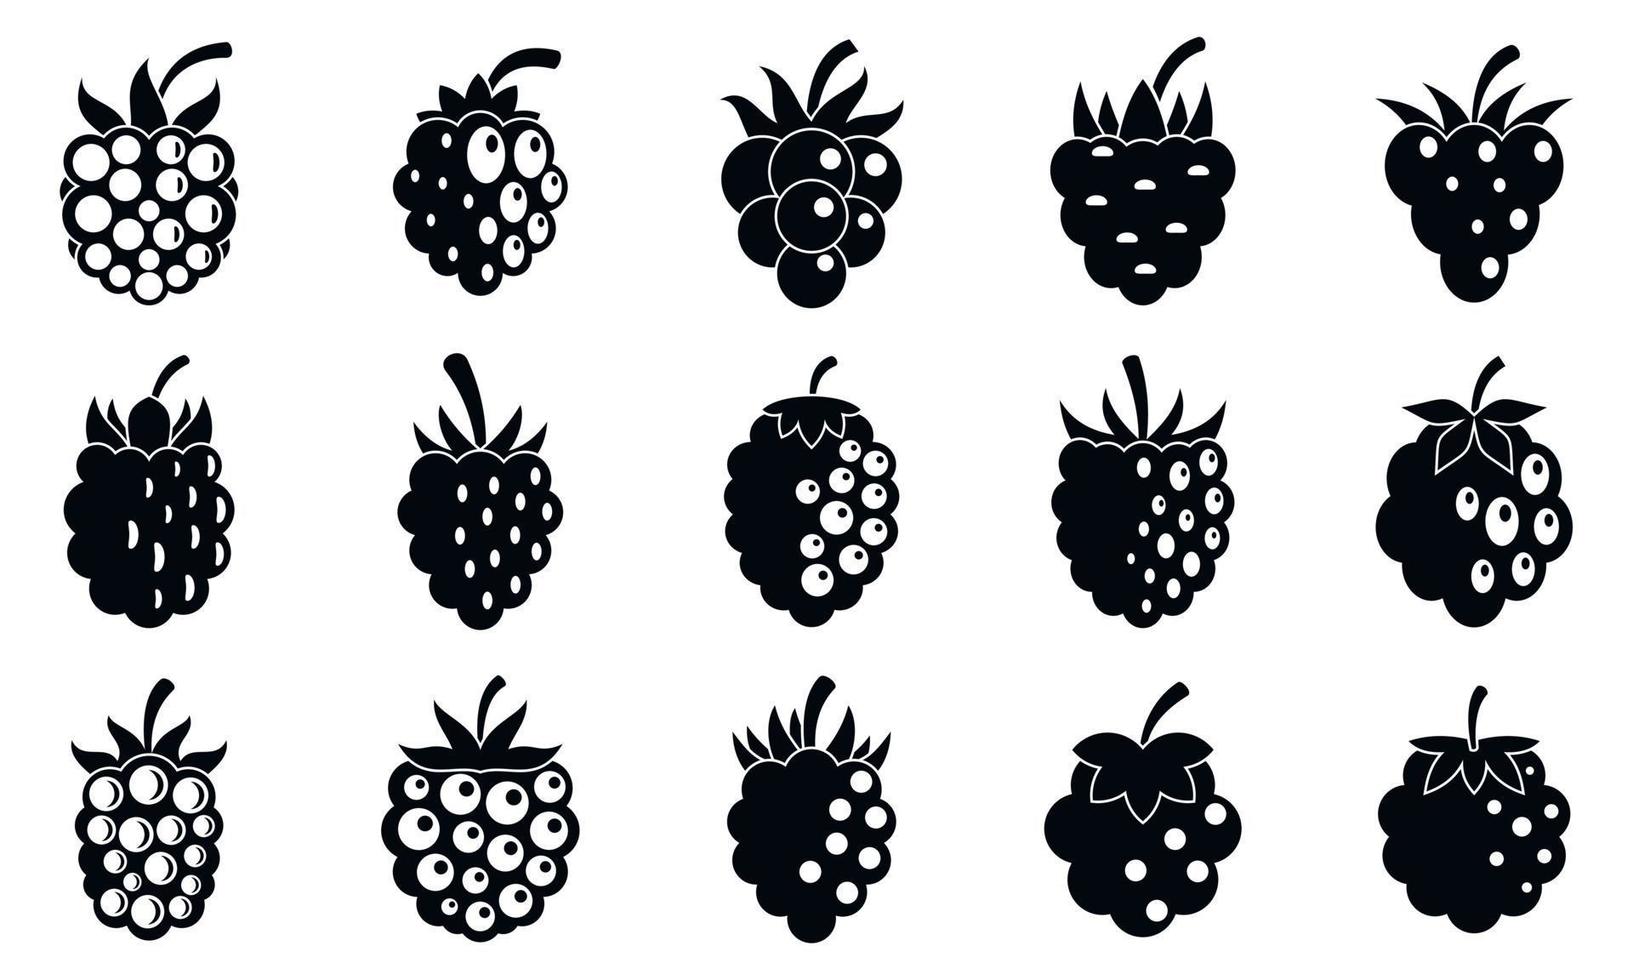 Delicious blackberry icons set, simple style vector